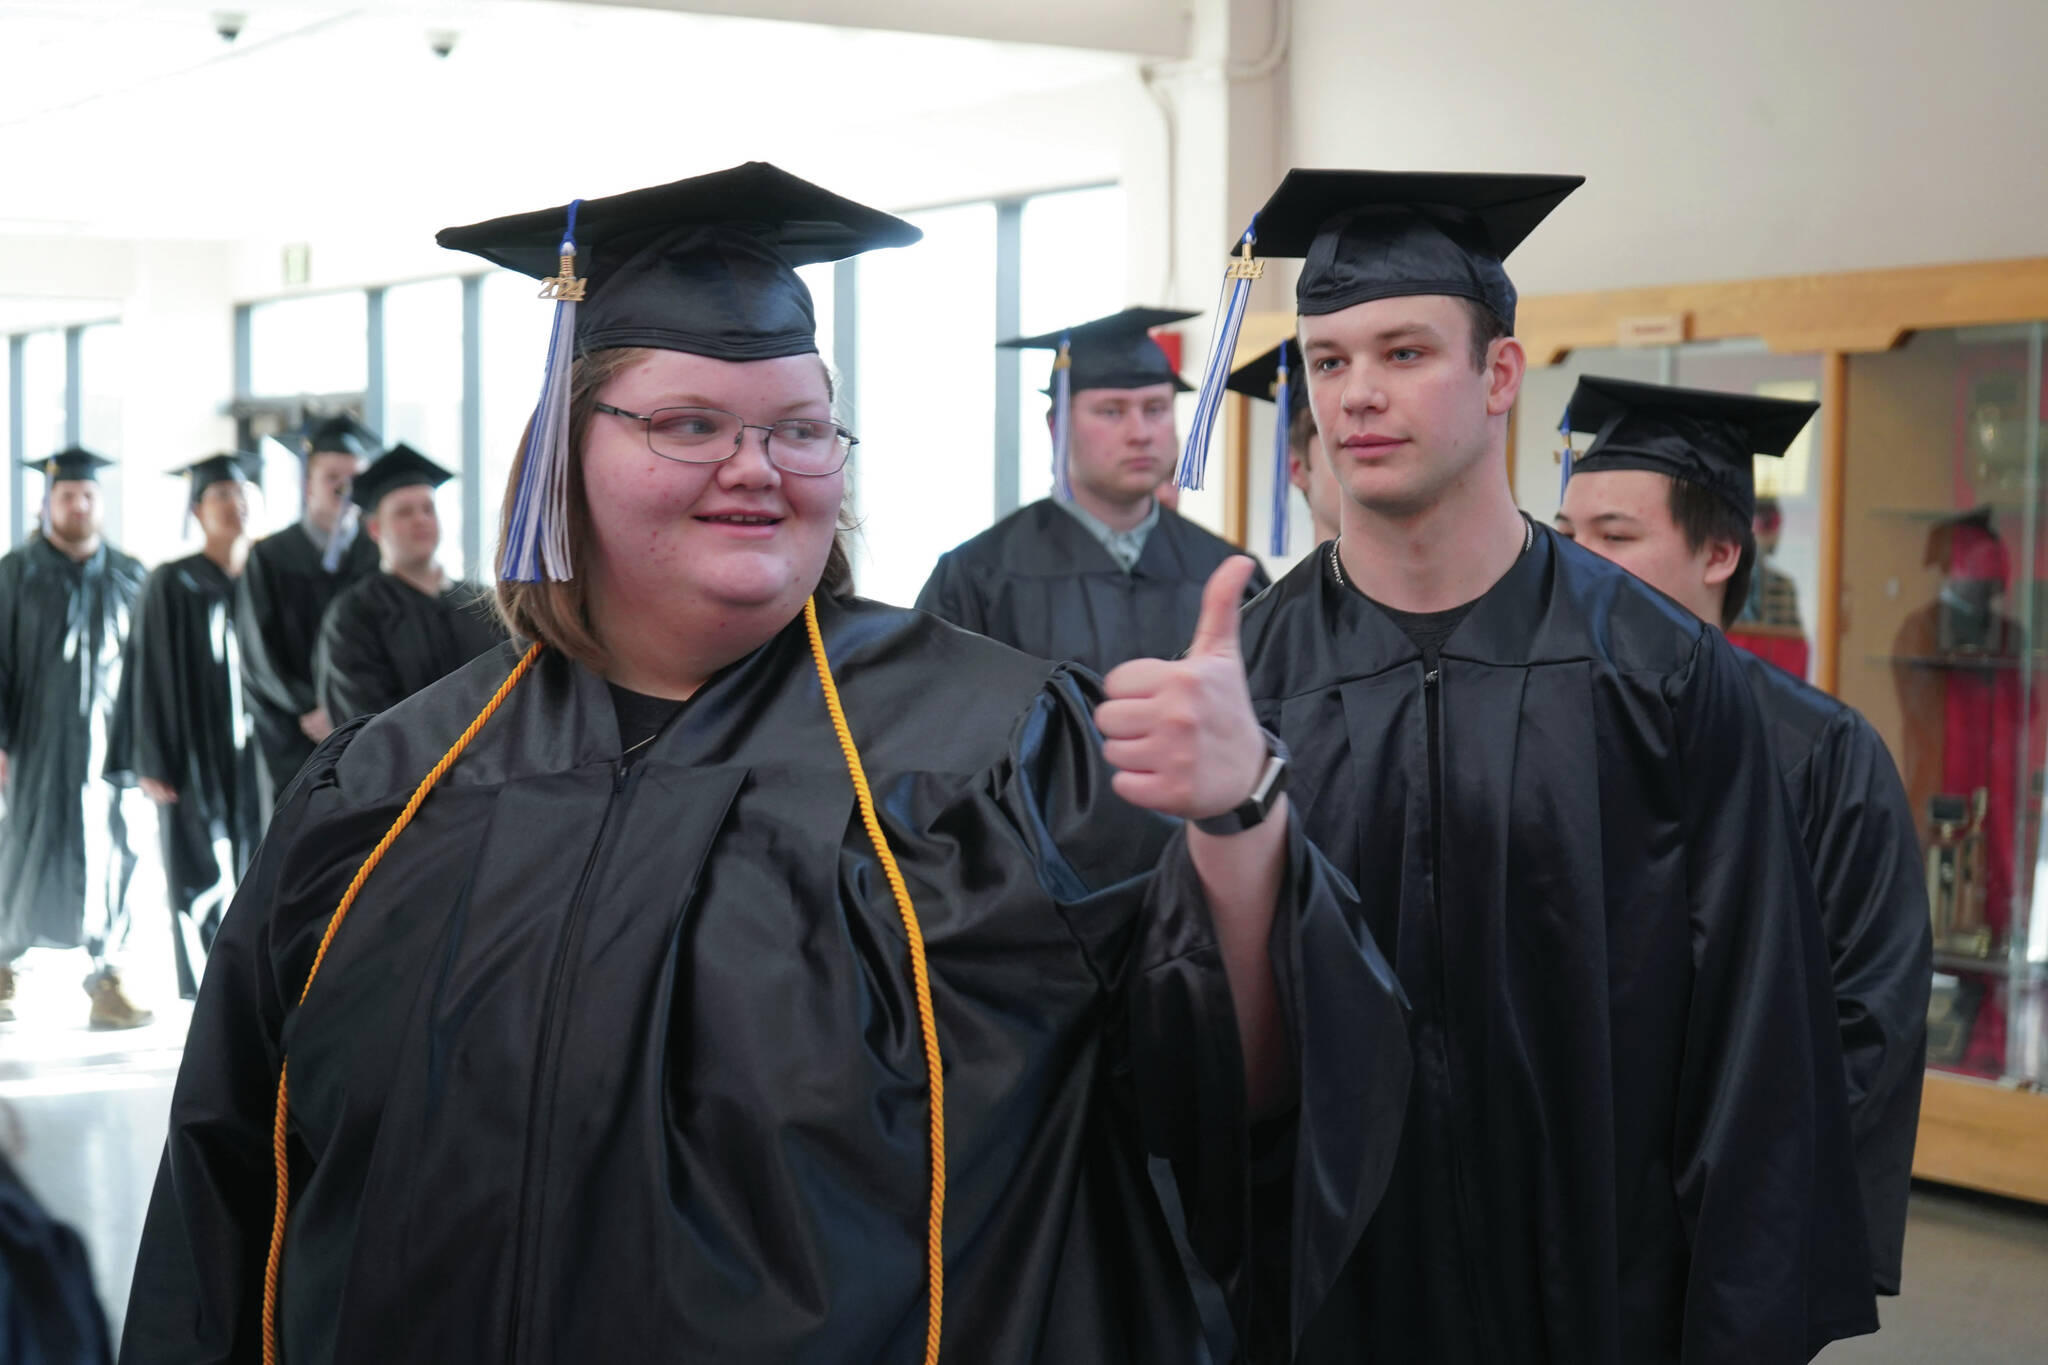 A graduate of Kenai Peninsula College gives a thumbs up as graduates proceed into the 54th Annual Kenai Peninsula College Commencement Ceremony at Kenai Central High School on Thursday. (Jake Dye/Peninsula Clarion)